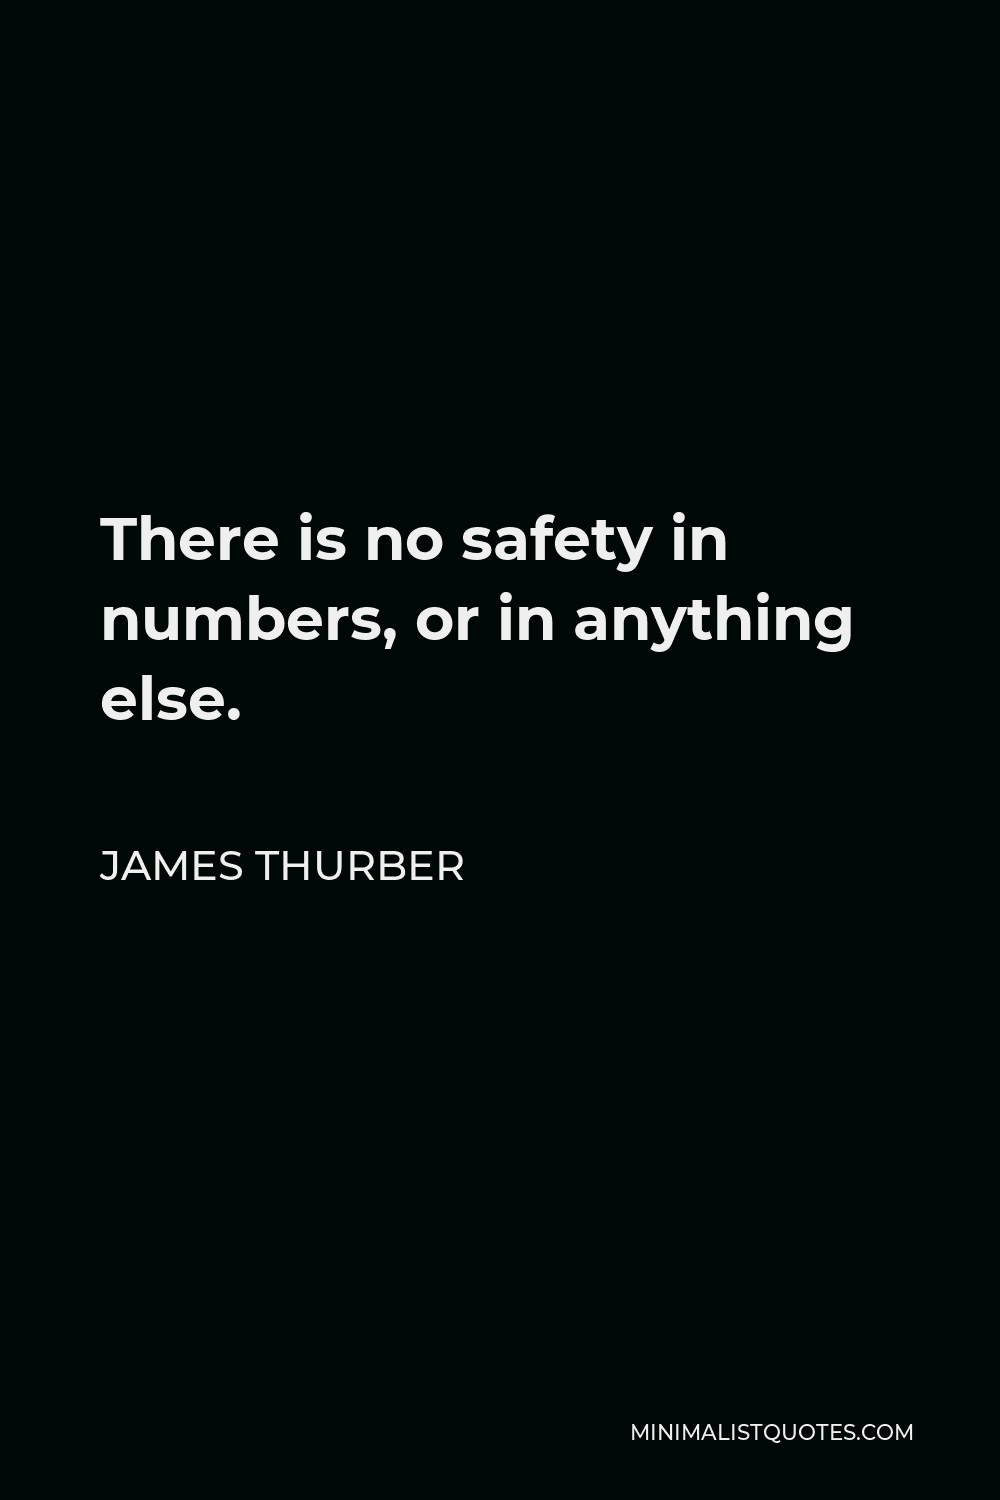 James Thurber Quote - There is no safety in numbers, or in anything else.